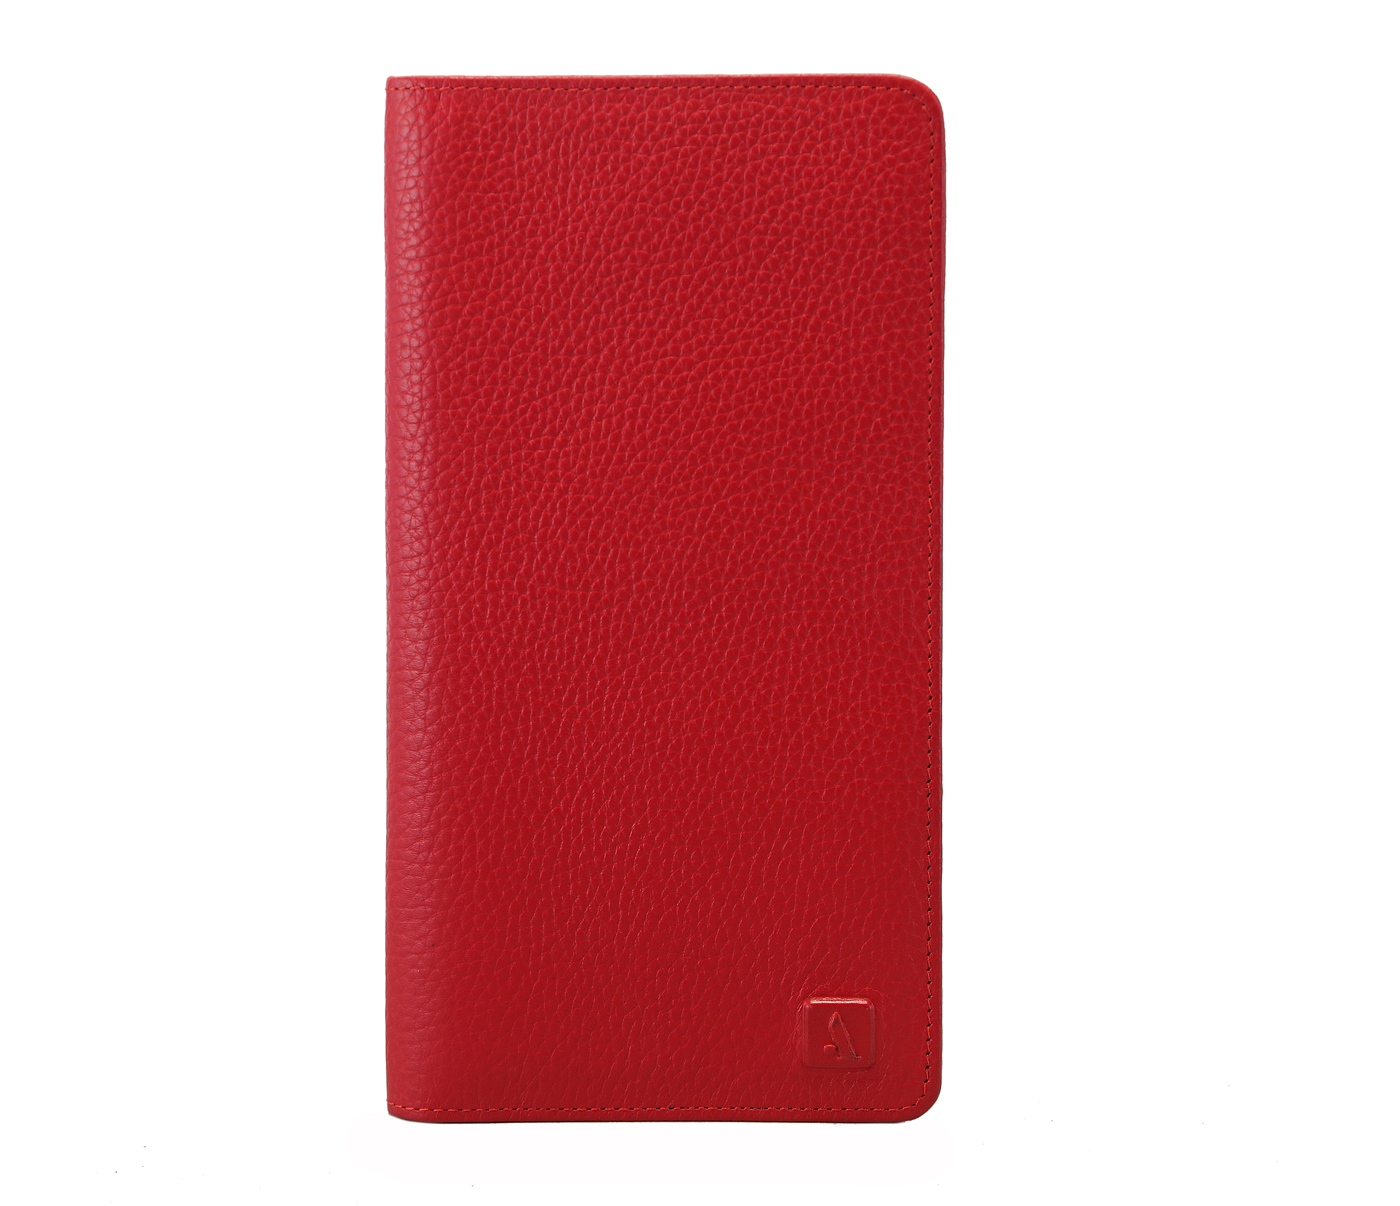 Wallet-Rafel-Travel document wallet in Genuine Leather - Red